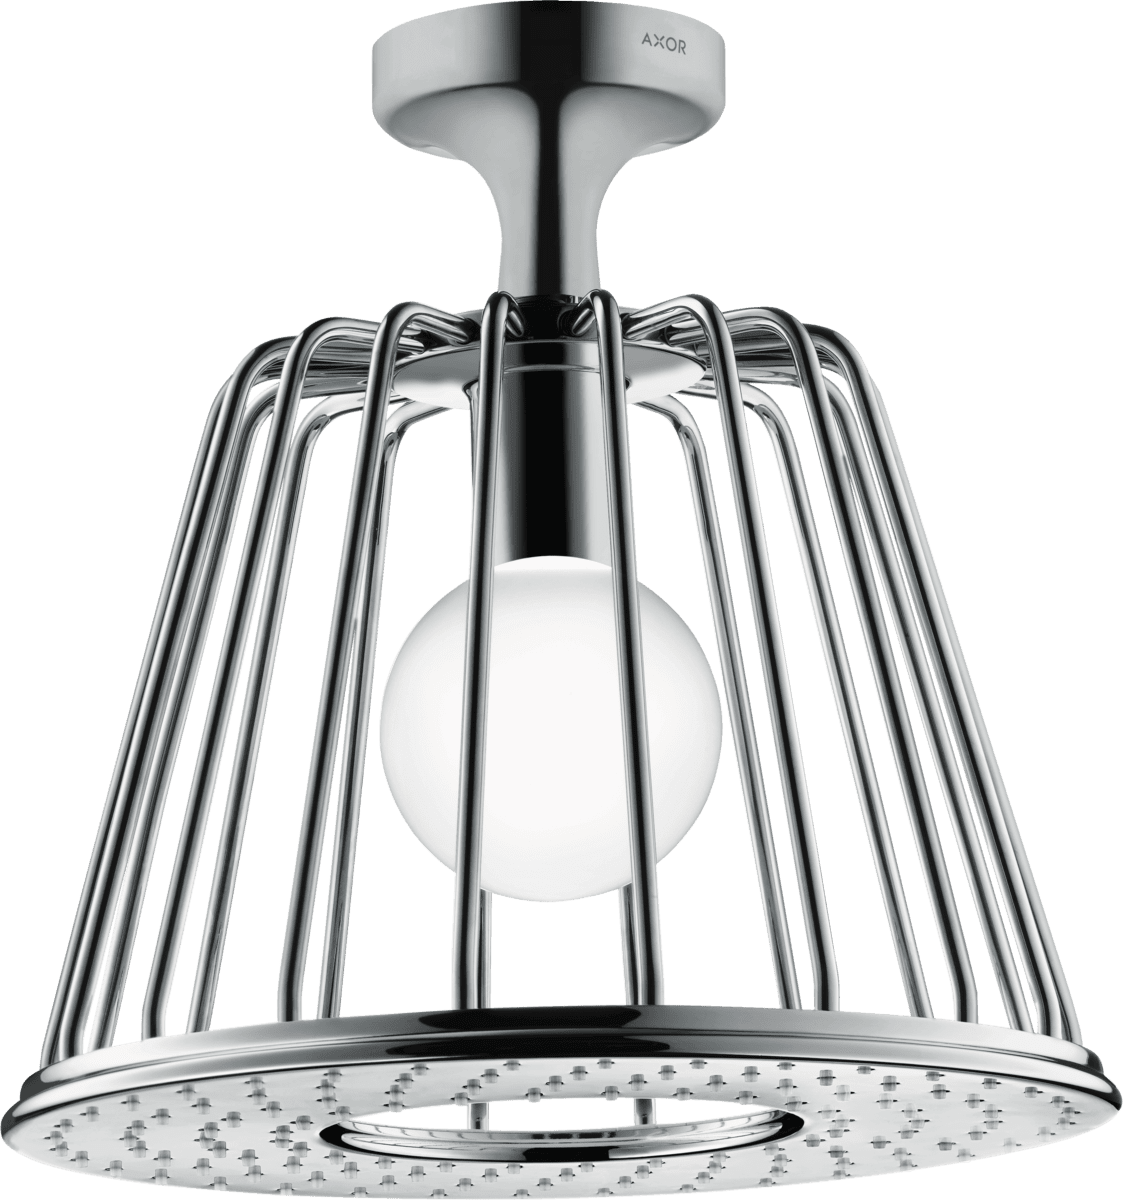 Picture of HANSGROHE AXOR LampShower/Nendo LampShower 275 1jet with ceiling connector #26032000 - Chrome